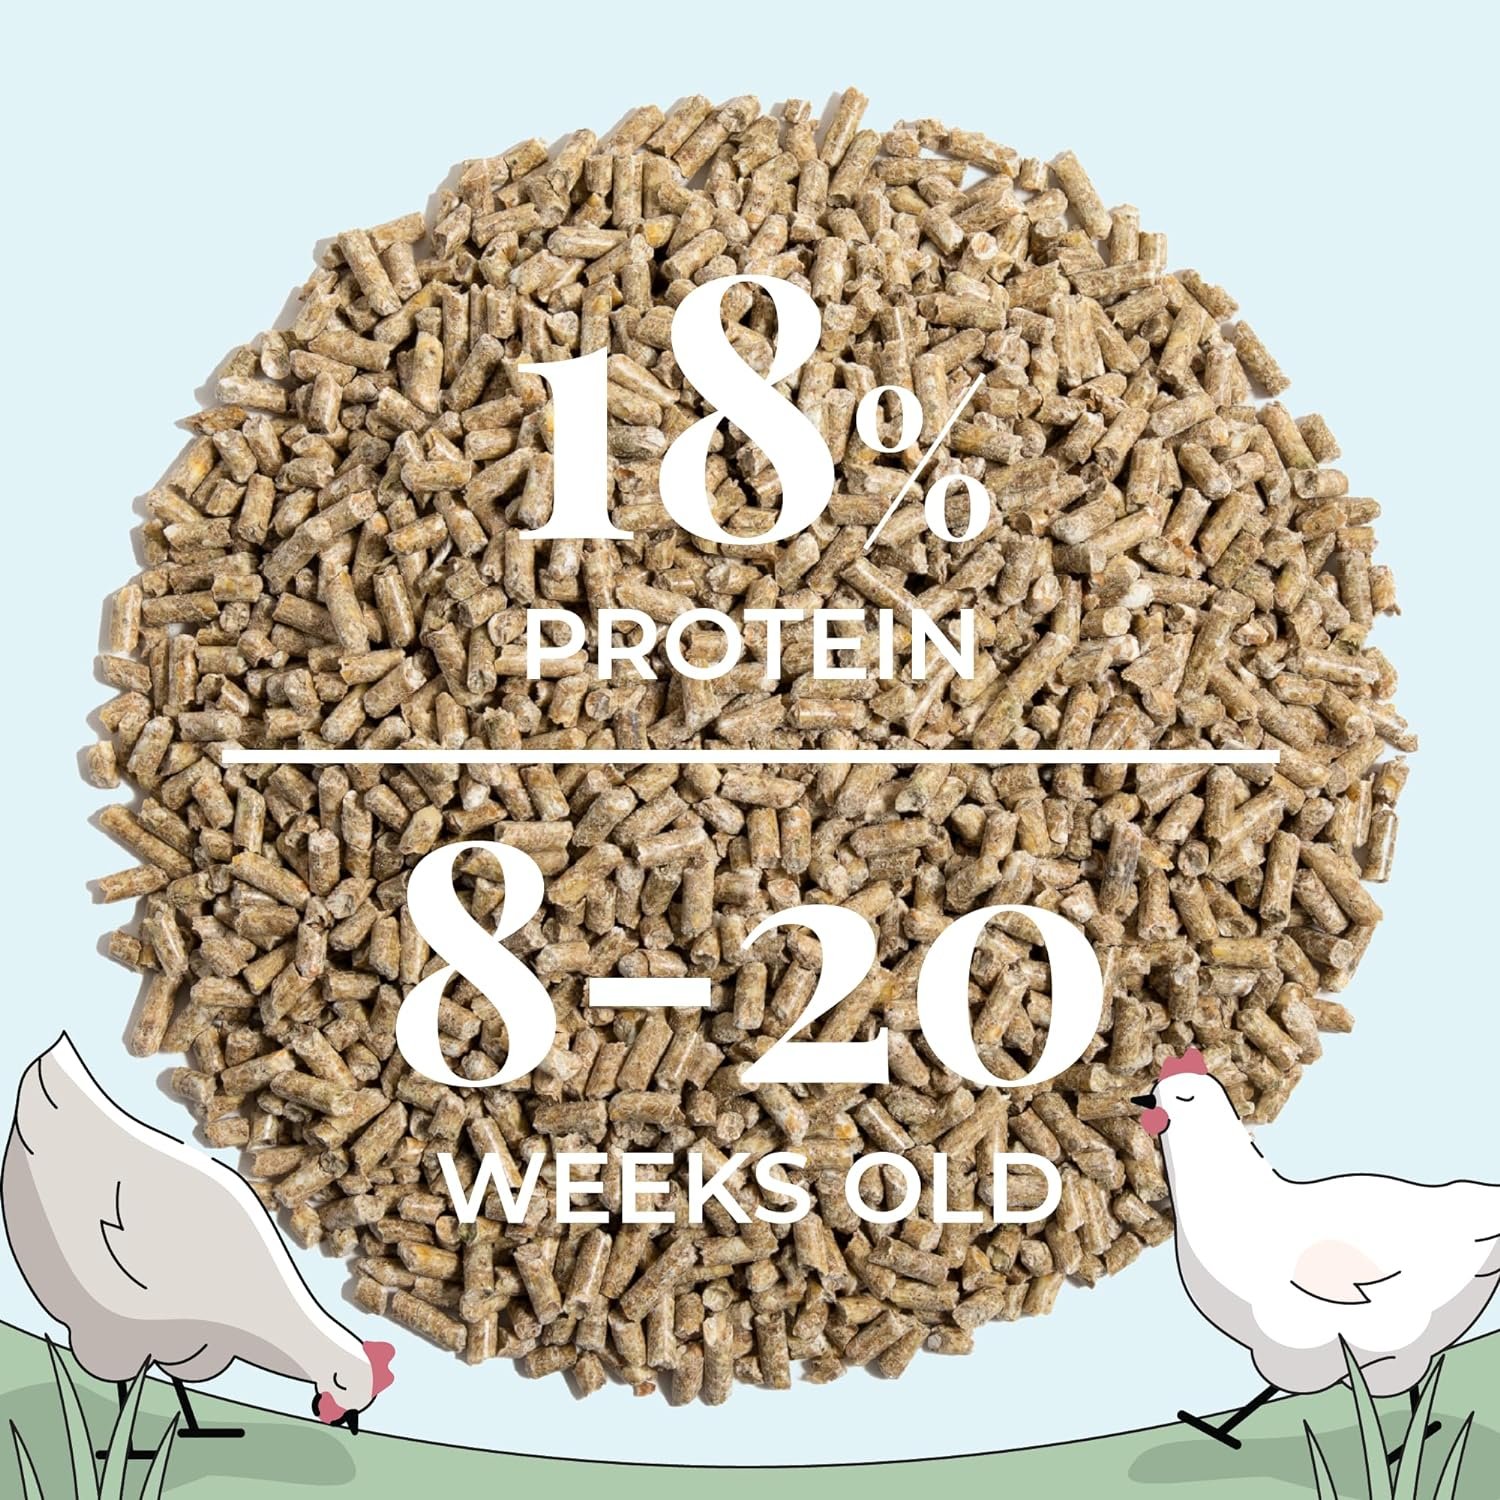 Mile Four | Grower Chicken Feed | Organic | Non-GMO, Corn-Free, Soy-Free, Non-Medicated Pullet Poultry Chicken Food | US Grown Grains | 18% Protein | Mash | 46 lbs.